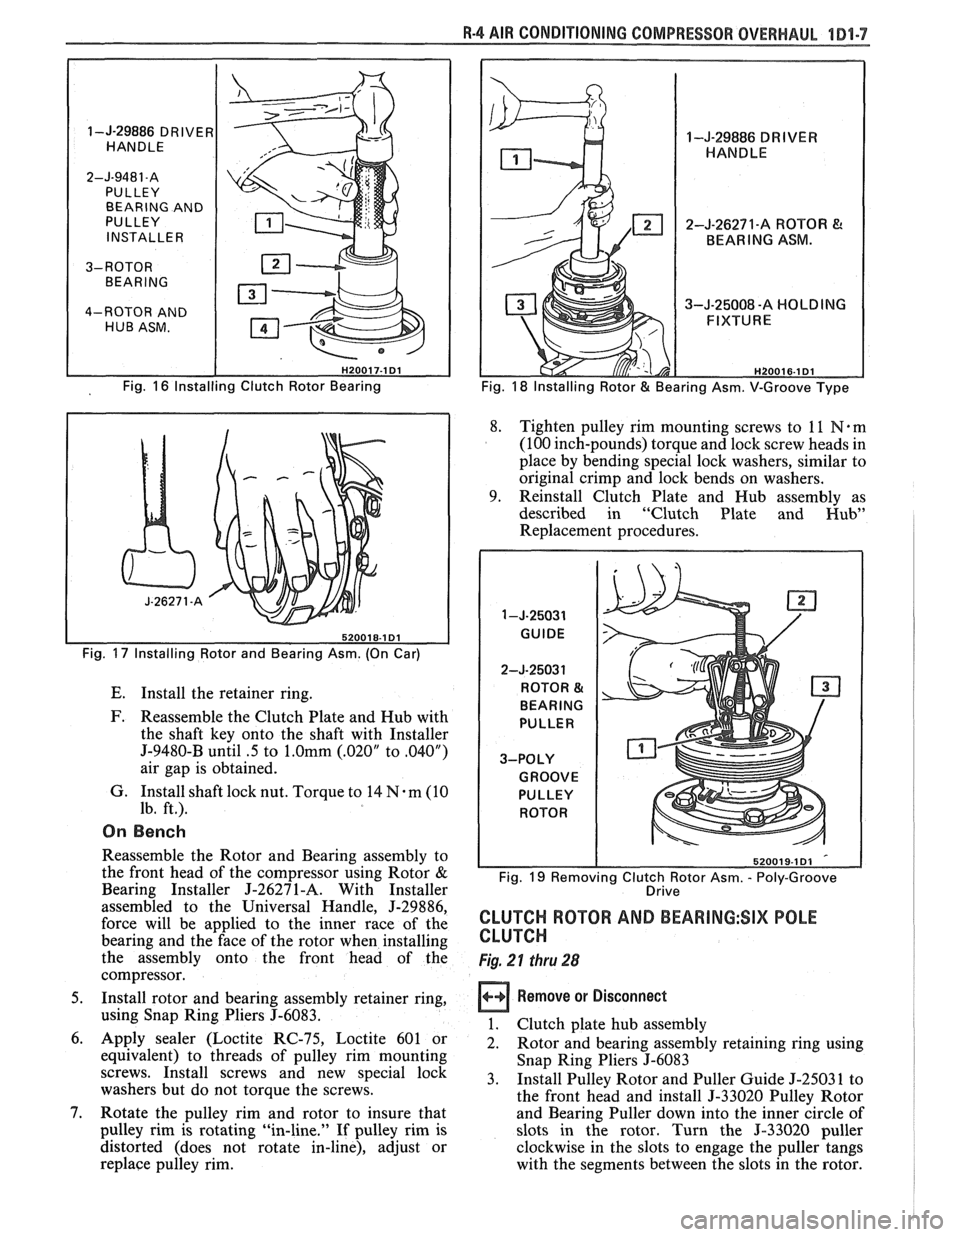 PONTIAC FIERO 1988  Service Repair Manual 
R-4 AIR CONDITIONING  COMPRESSOR  OVERHAUL 1B1-7 
I 
1-J-29886 DRIVER 
HANDLE 
2-J-9481 -A PULLEY  BEARING  AND 
PULLEY  INSTALLER 
3-ROTOR  BEARING 
I 
4-ROTOR  AND 
HUB  ASM. 
Fig. 
16 Installing C